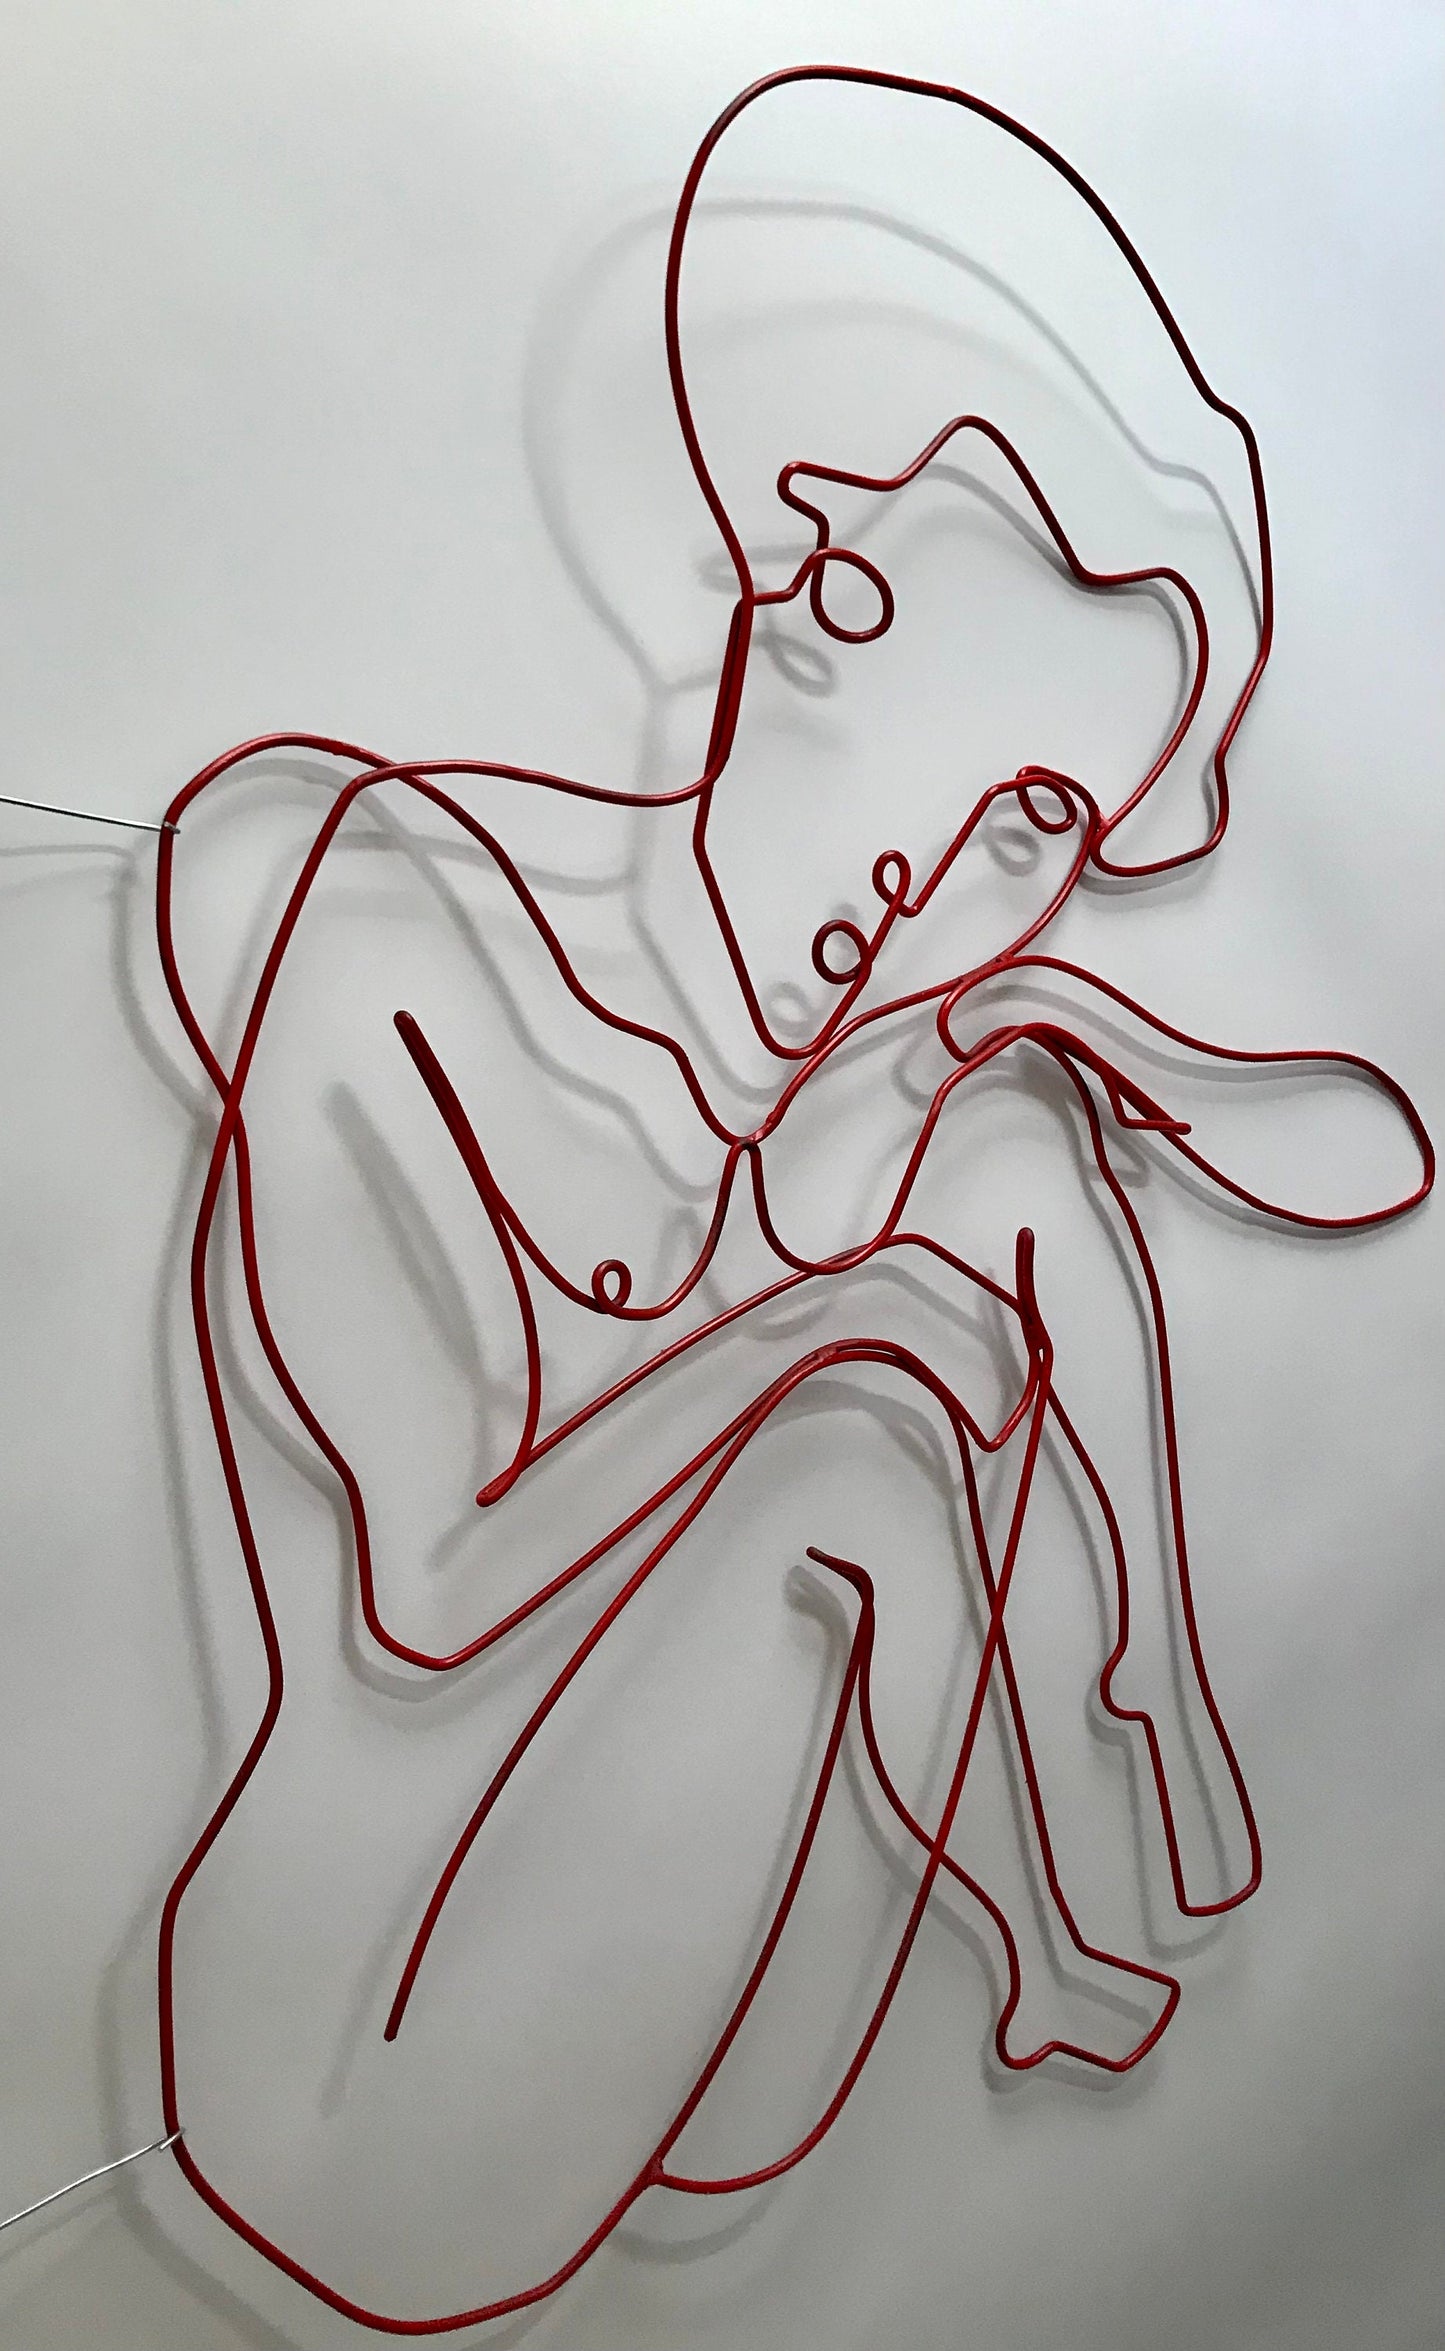 BIG RED, 2020-2022 welded wall art wire sculpture